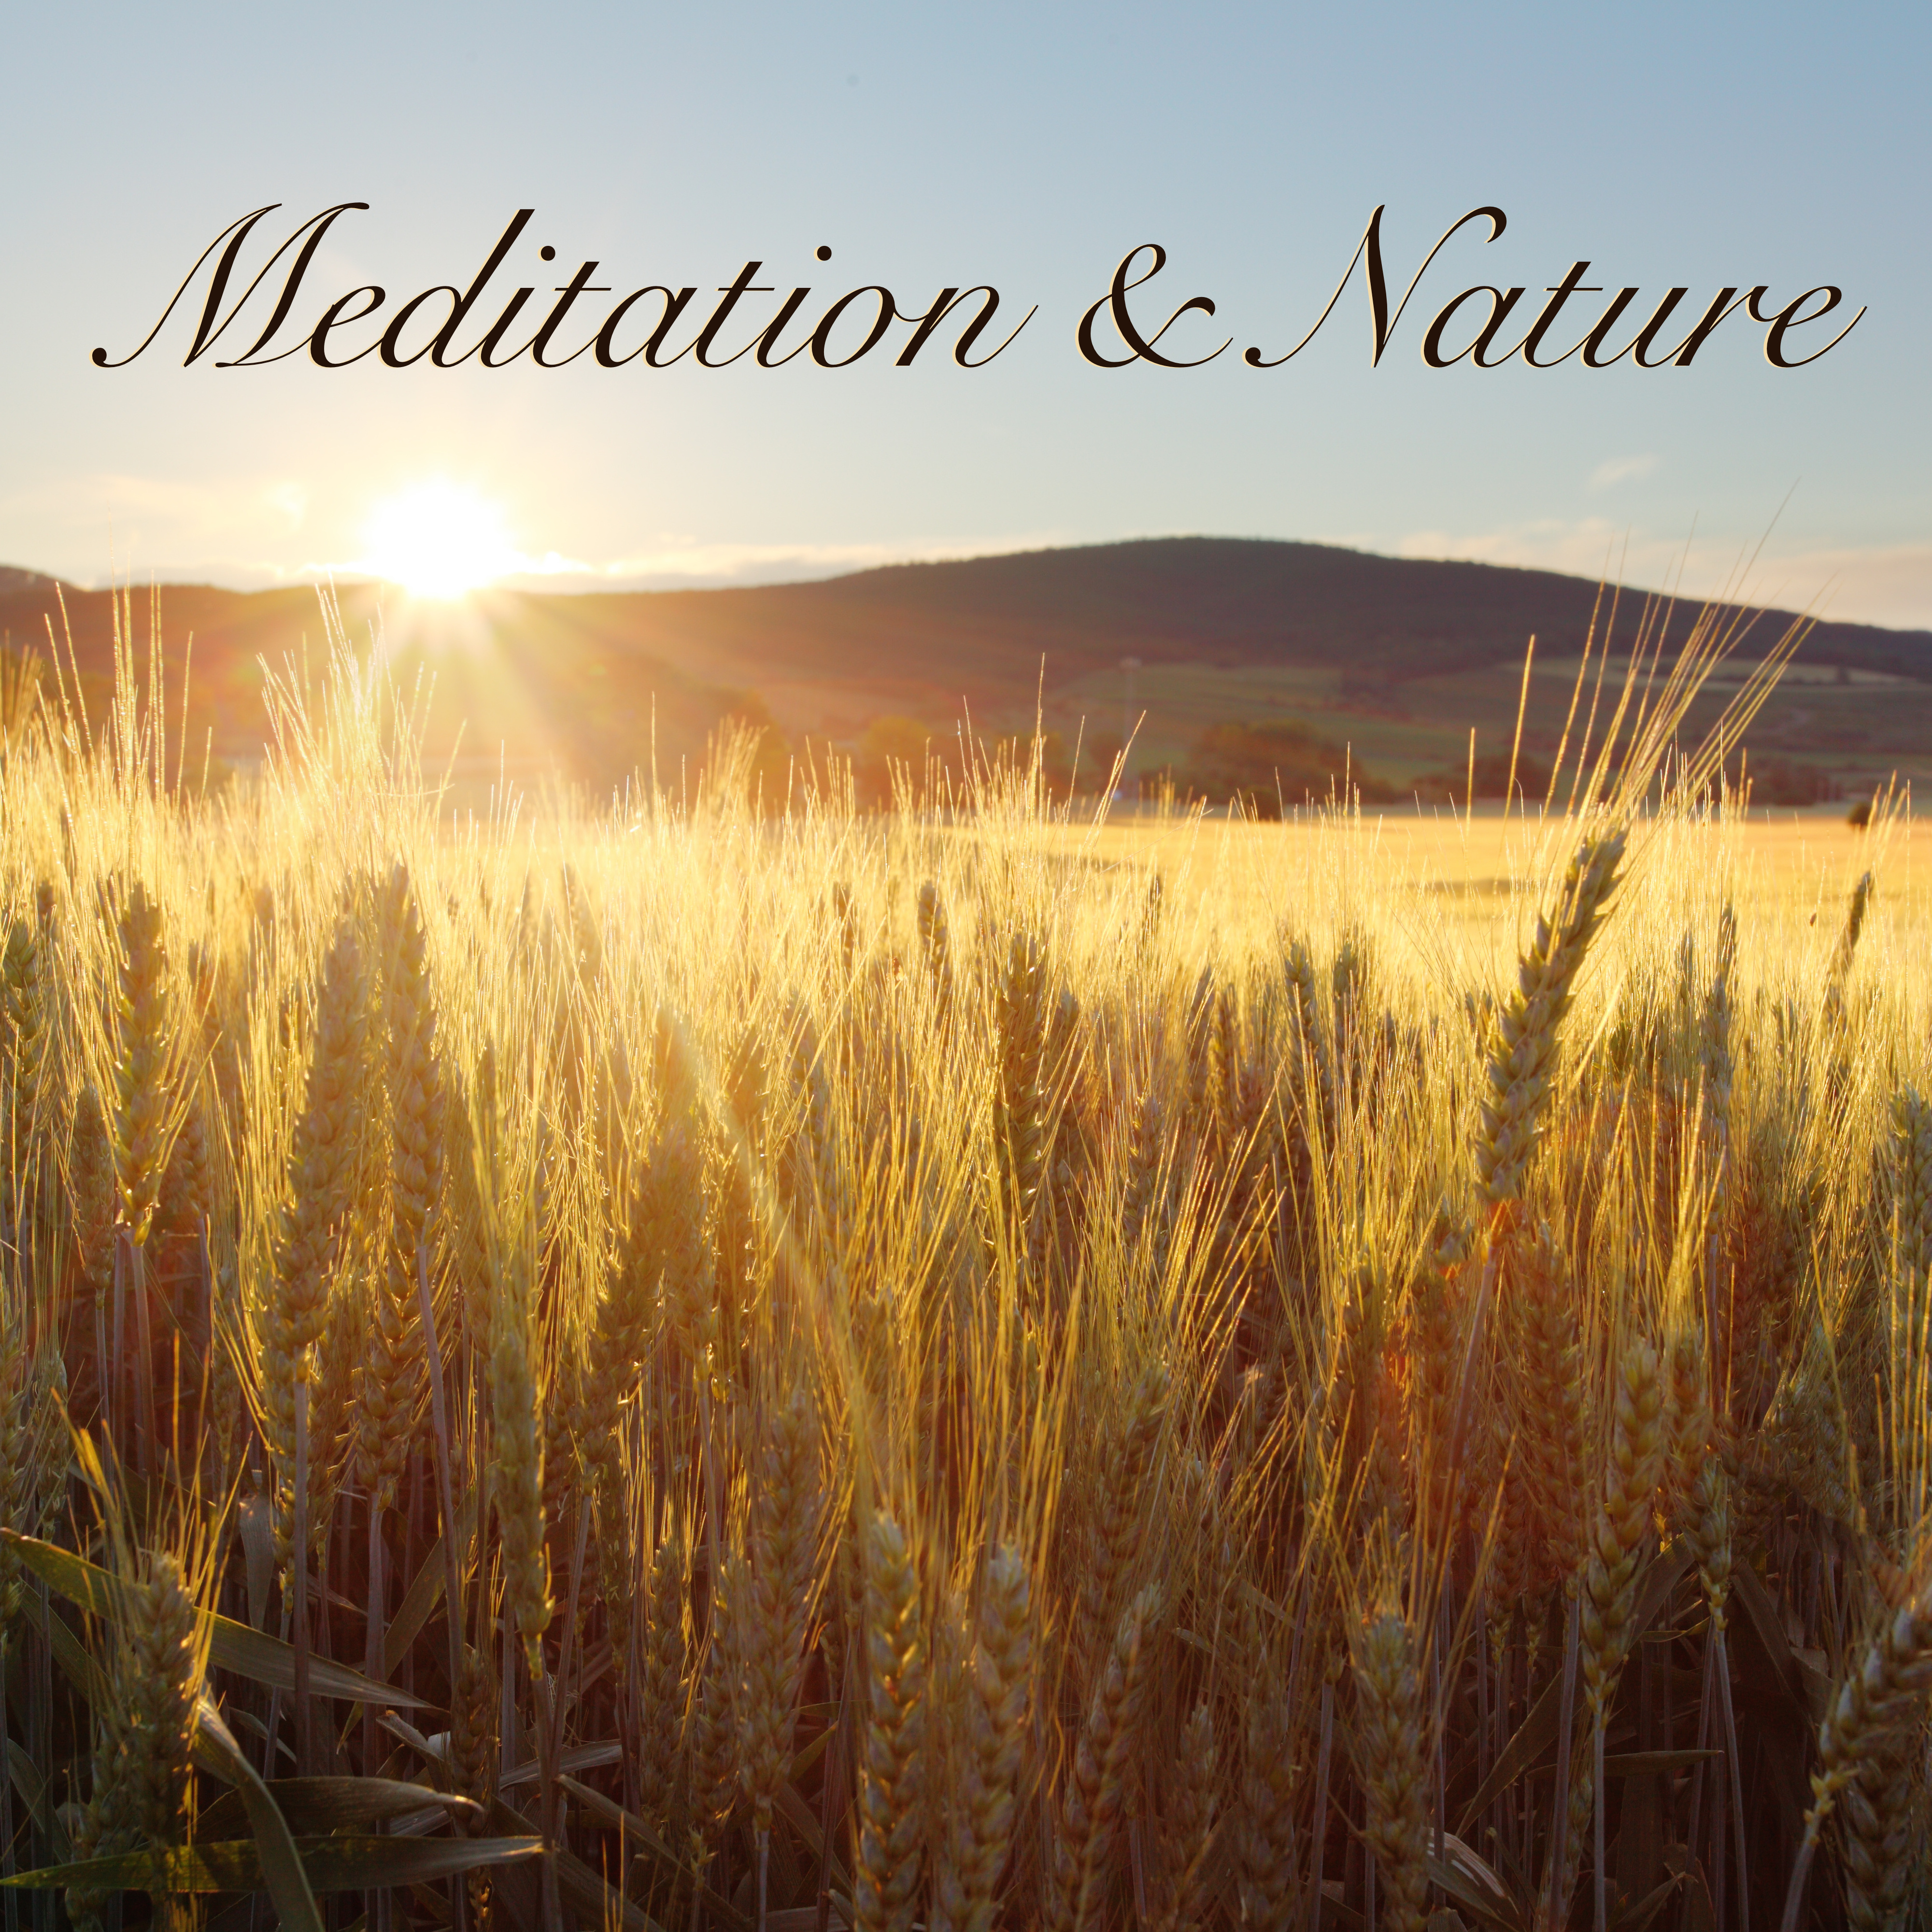 Meditation & Nature - Meditation Music Relaxation Songs to Rest